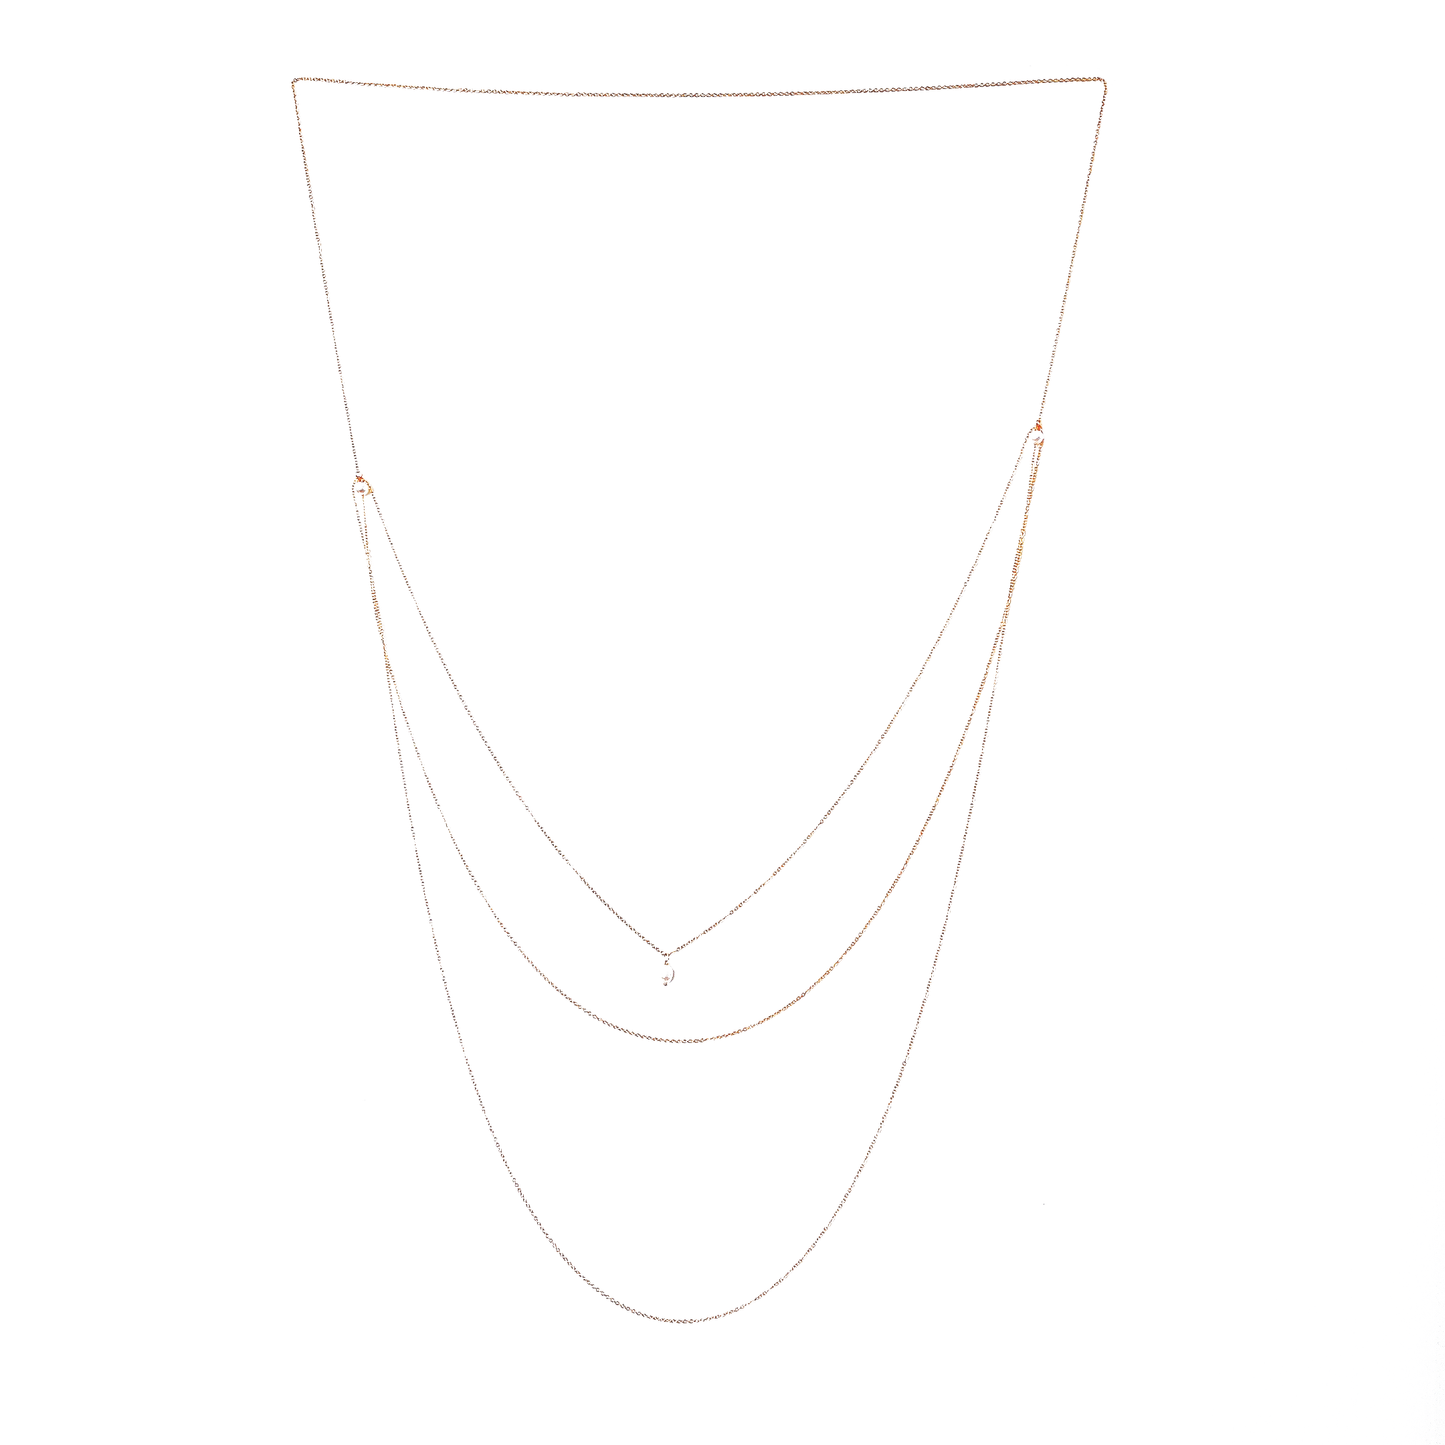 Front and back long necklace featuring three loops with white pearl accents.